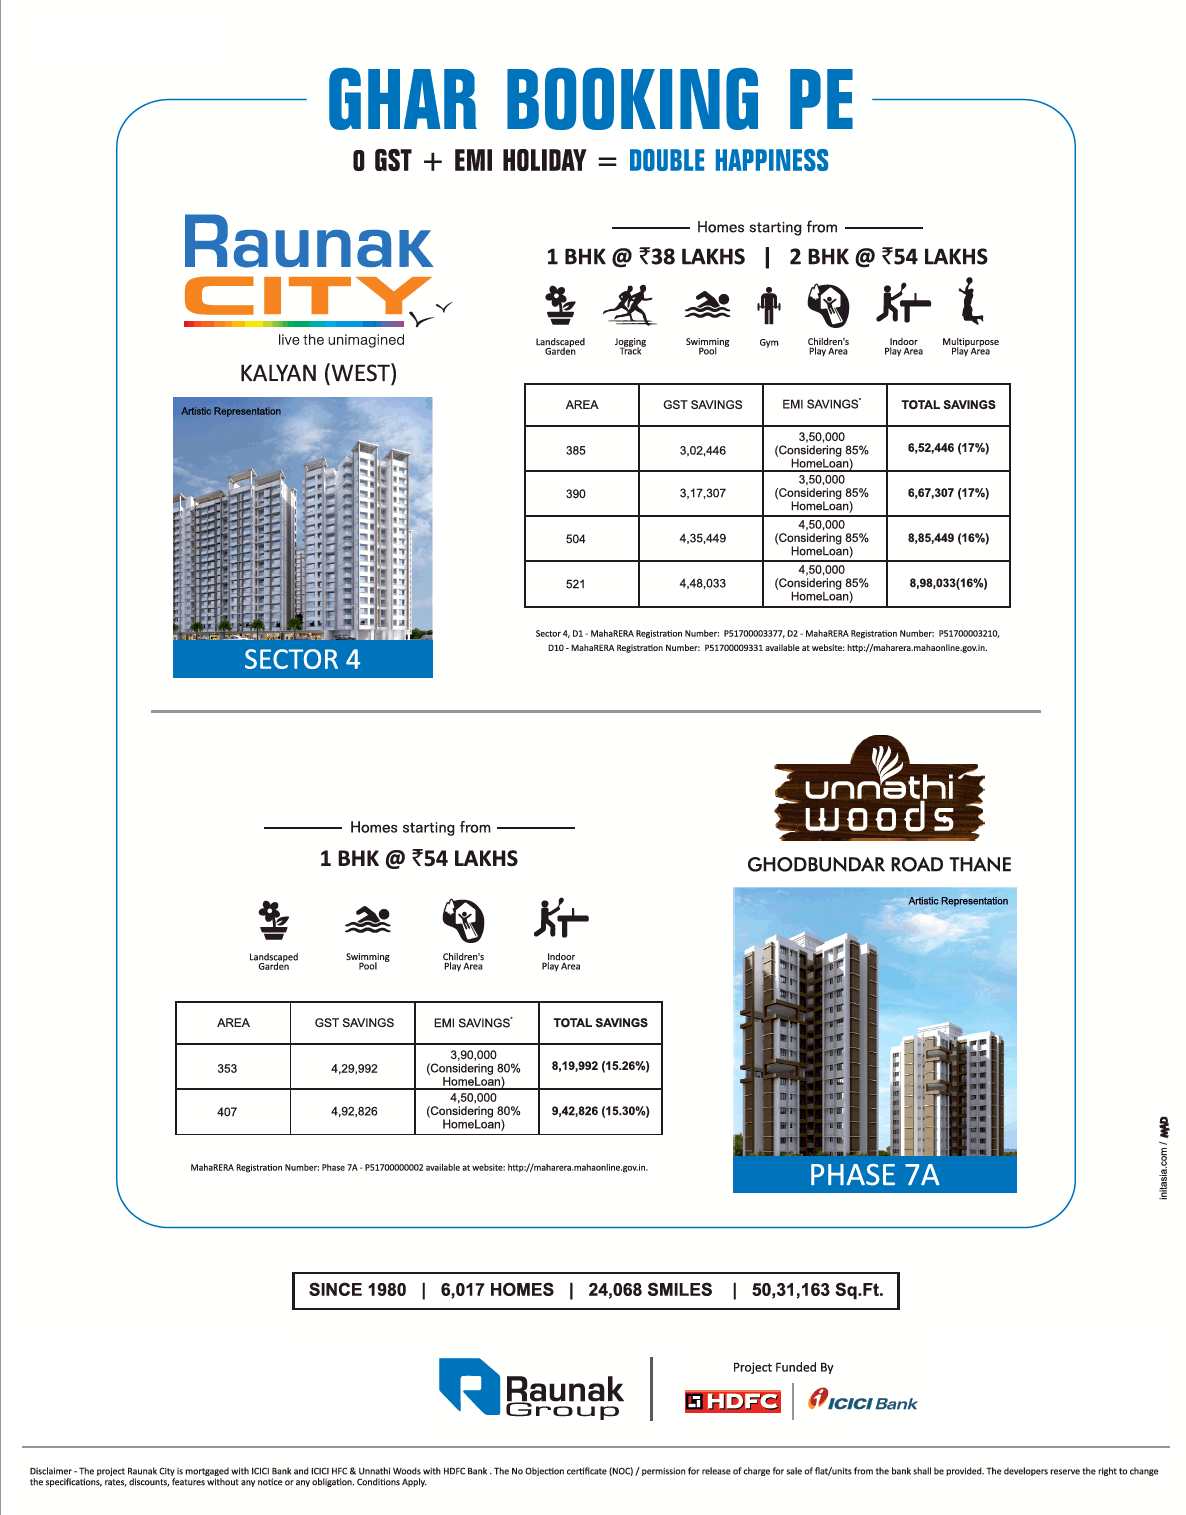 Invest in Raunak Group homes for double happiness in Mumbai Update